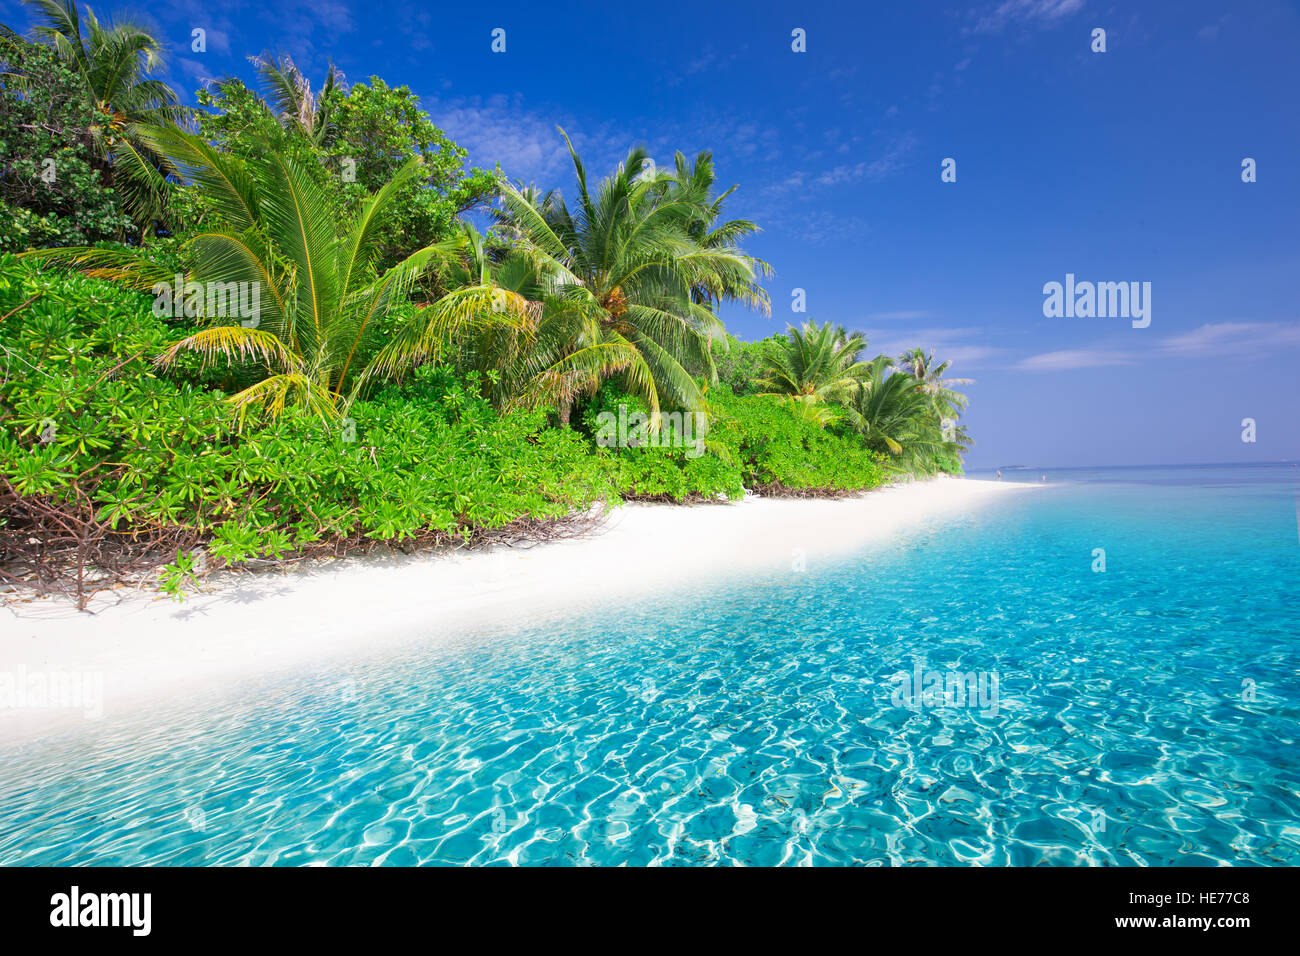 Tropical island with sandy beach with palm trees and turquoise clear water Stock Photo